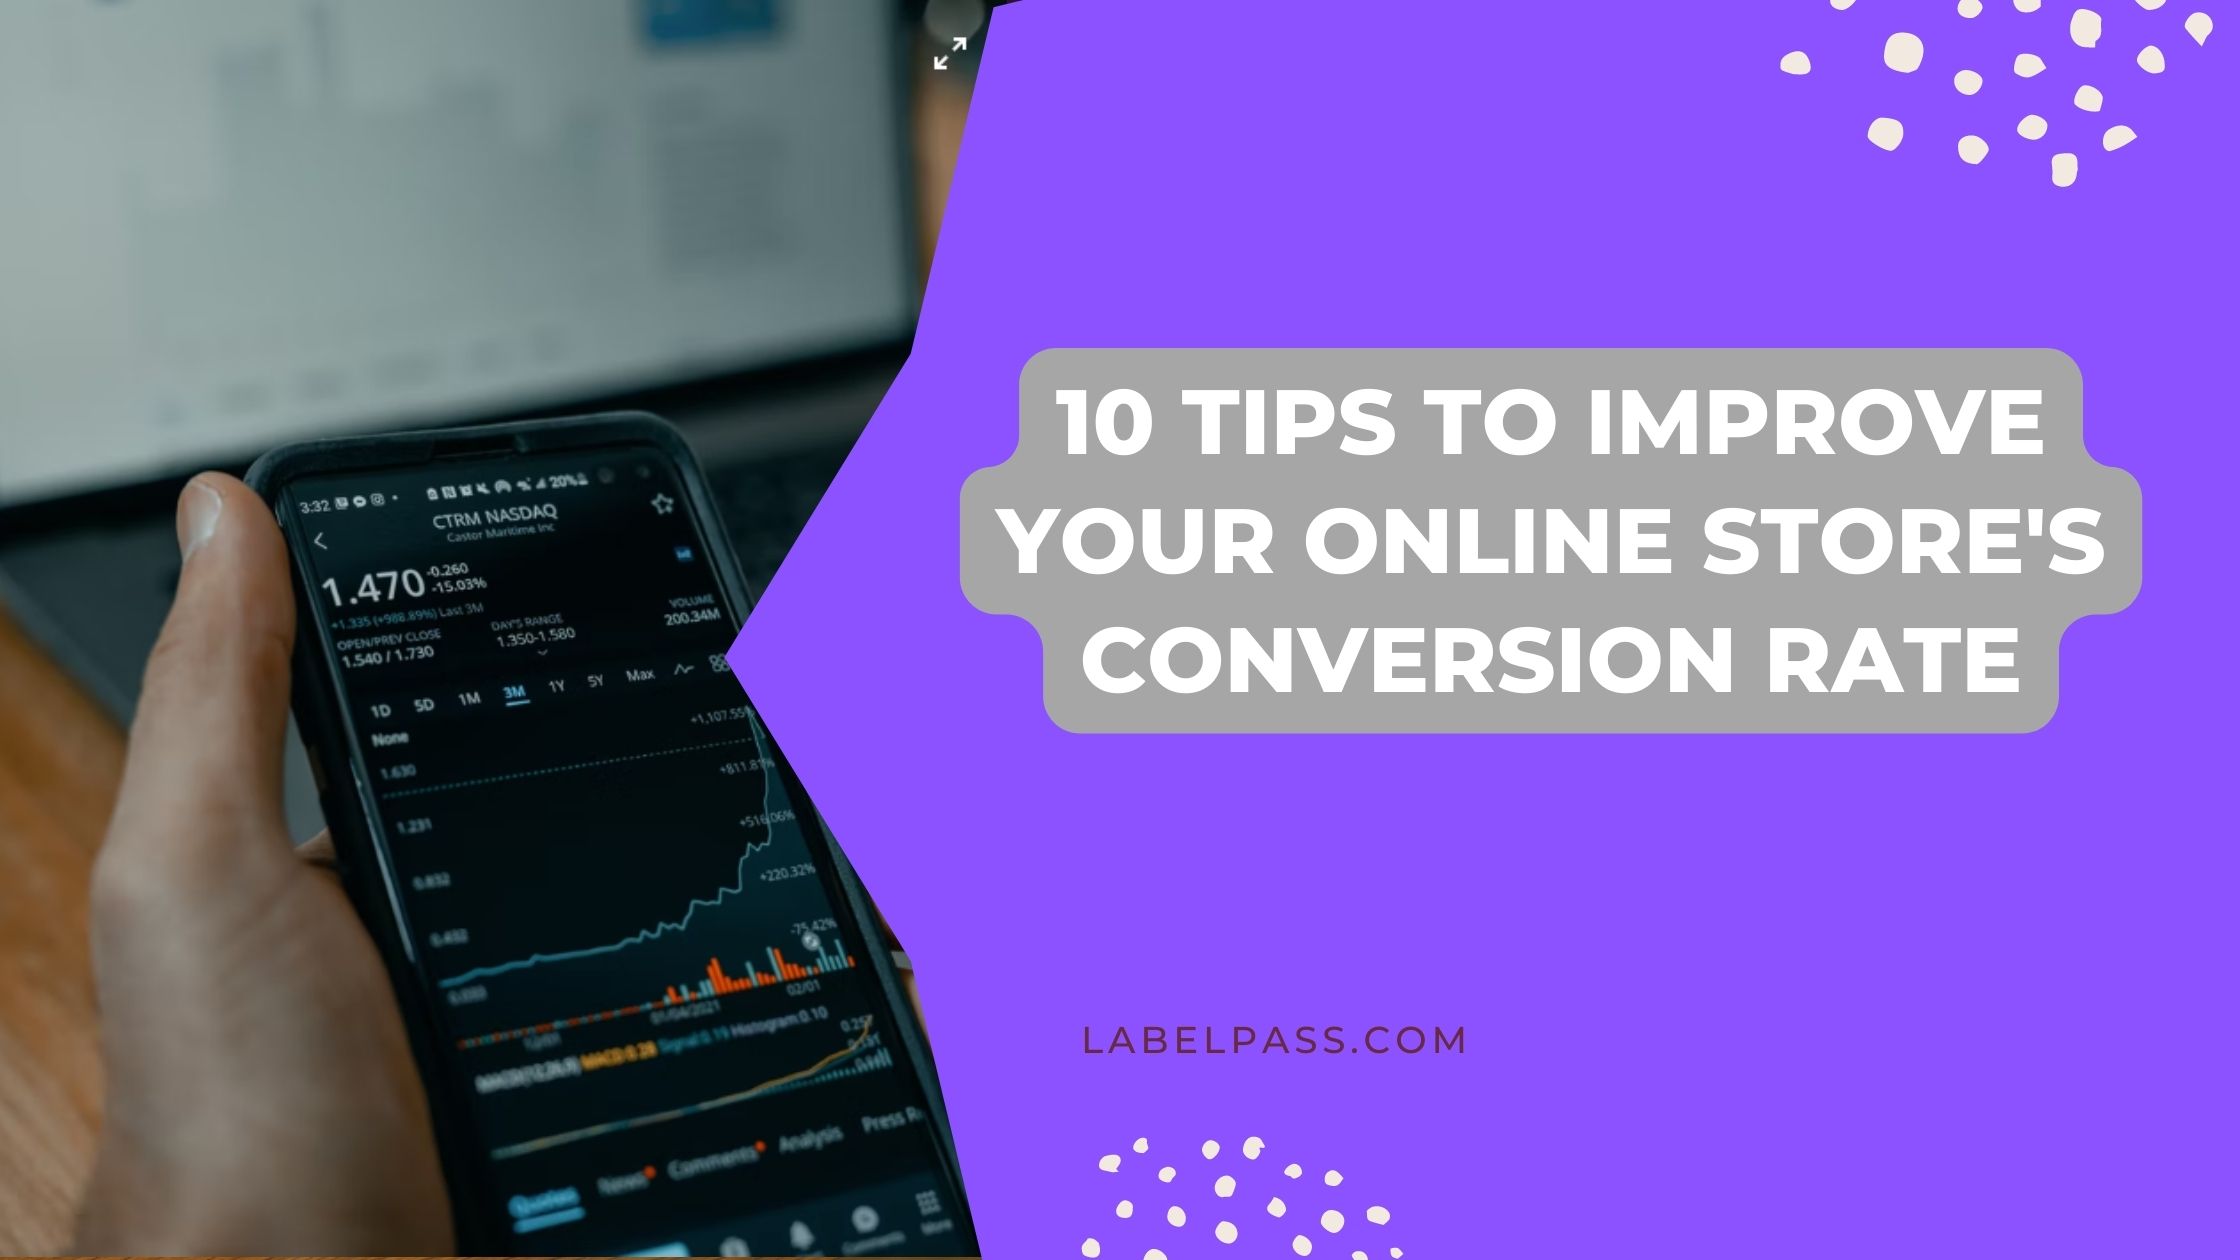 10 Tips to Improve Your Online Store’s Conversion Rate